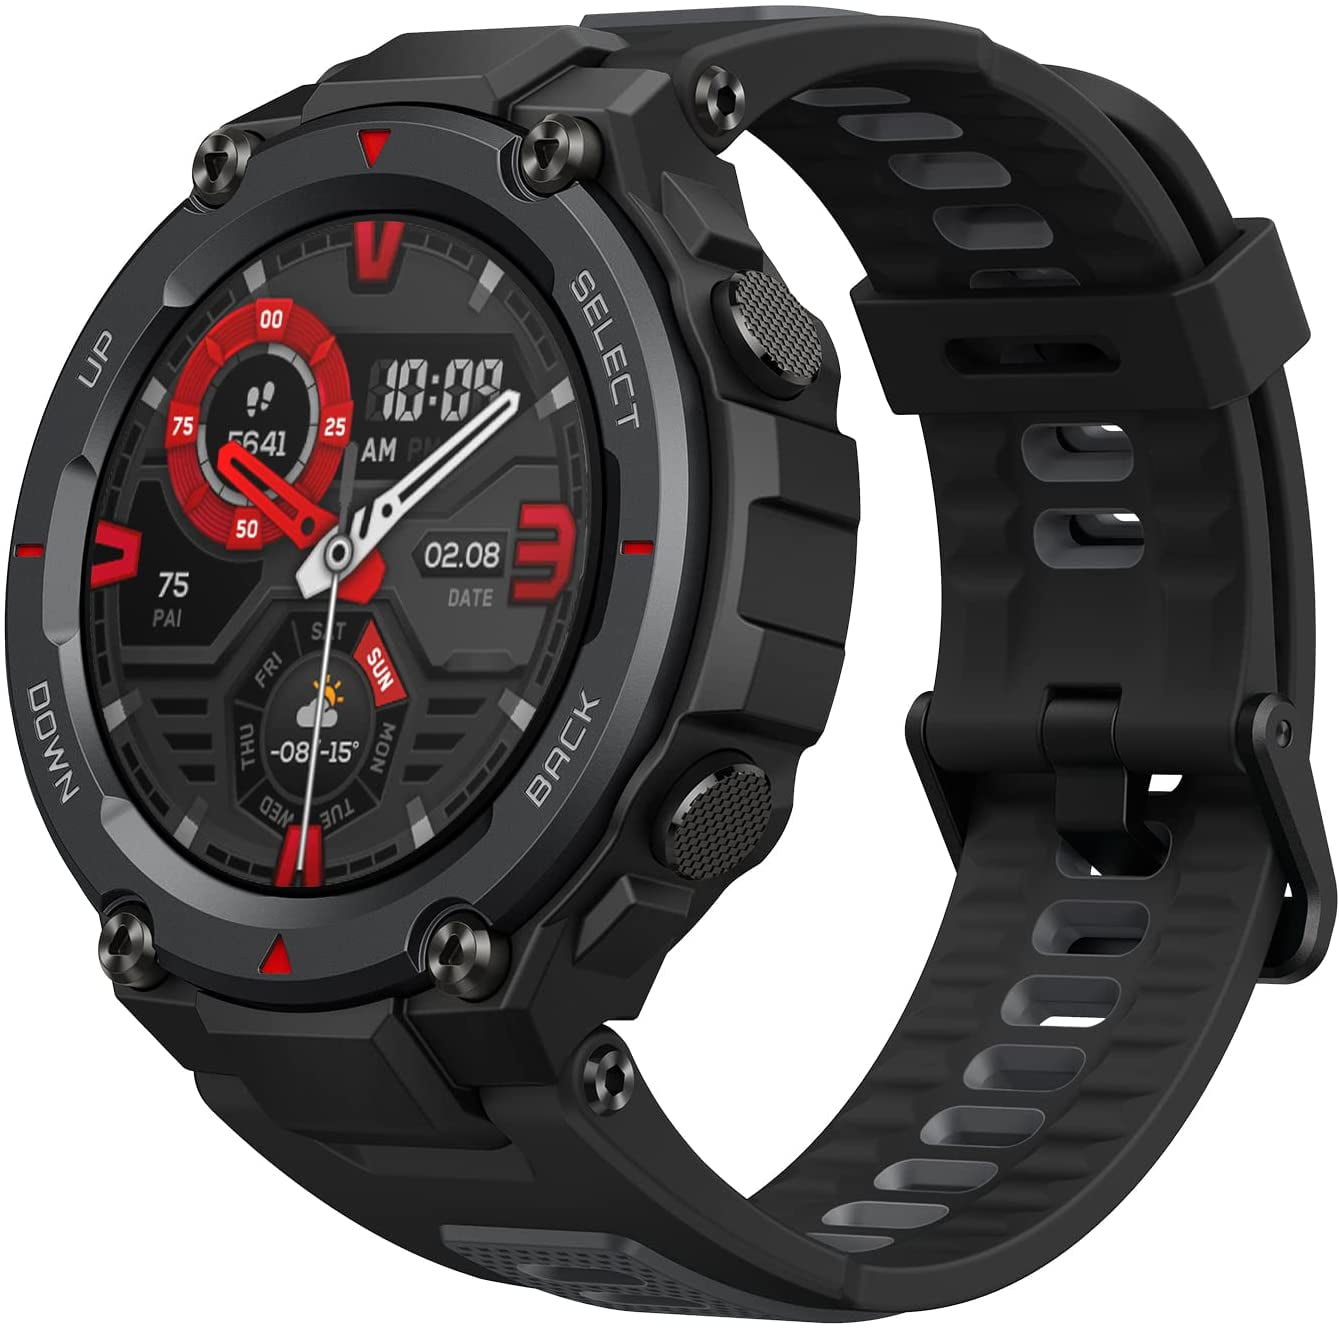 Amazfit T-Rex Pro Smart Watch: Rugged Outdoor GPS Fitness Watch - 15 Military Standard Certified - 100+ Sports Modes - 10 ATM Water-Resistant - 18 Day Battery Life - Blood Oxygen Monitor, Black